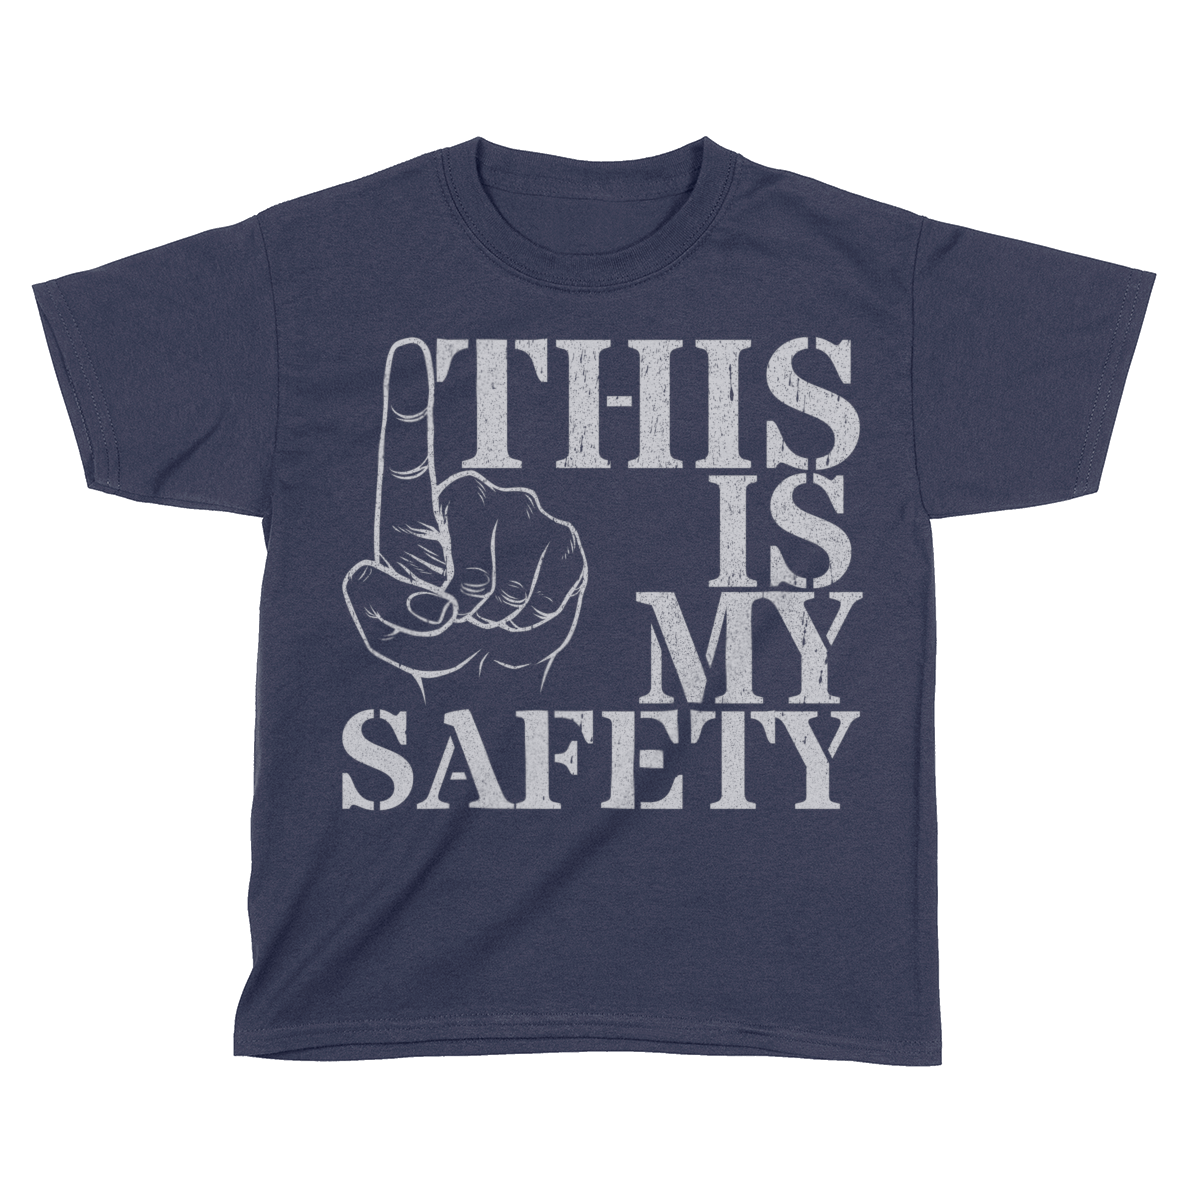 This Is My Safety (Kids)